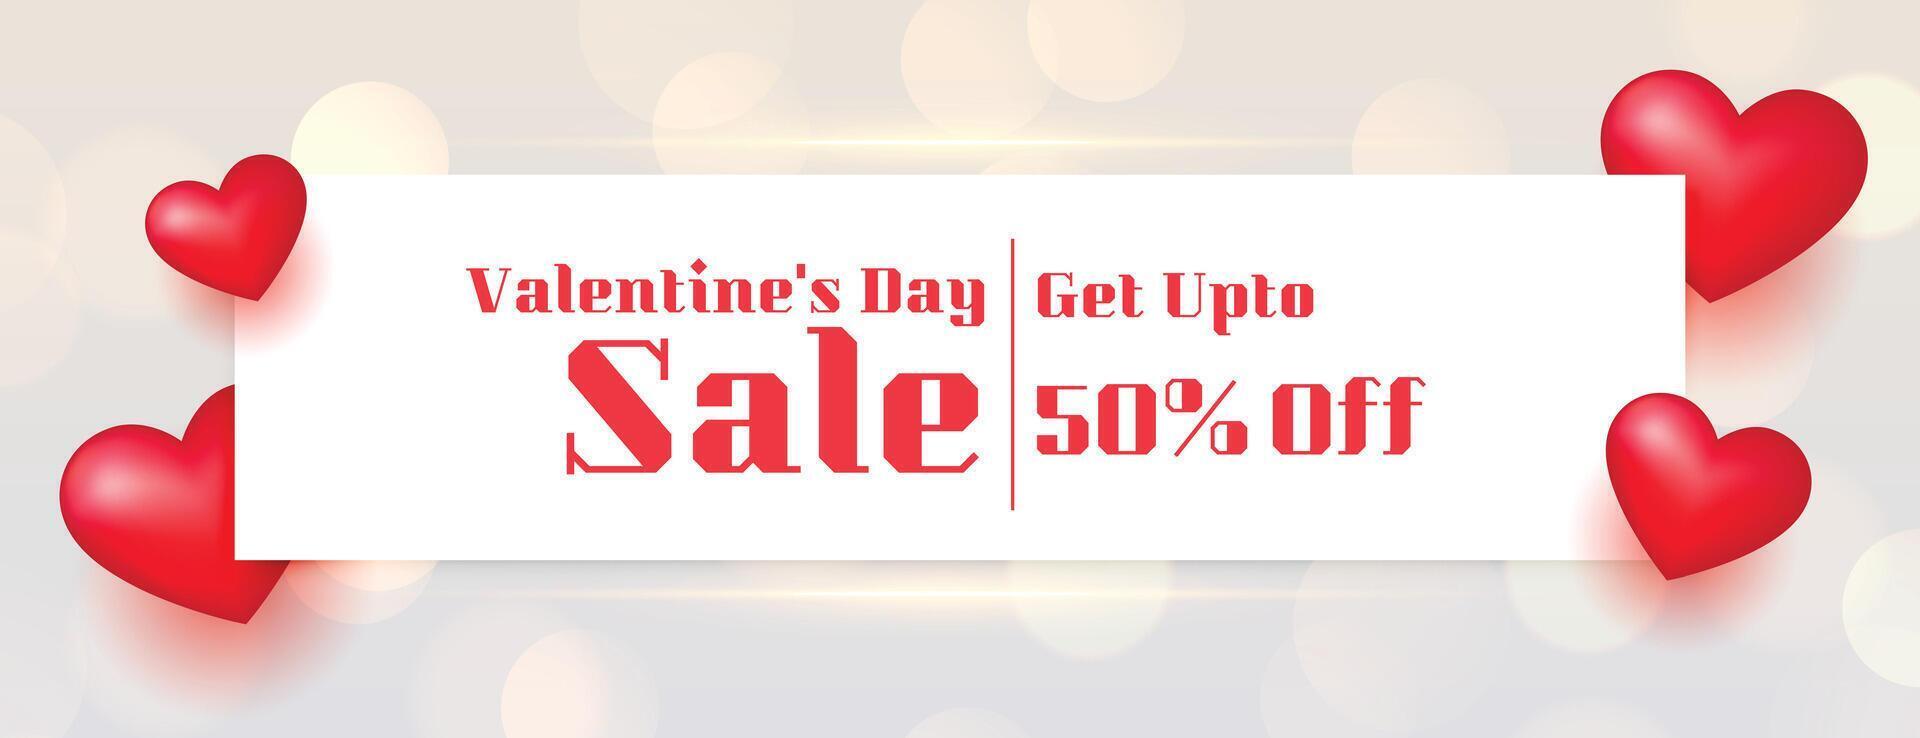 valentines day sale banner with 3d red hearts vector